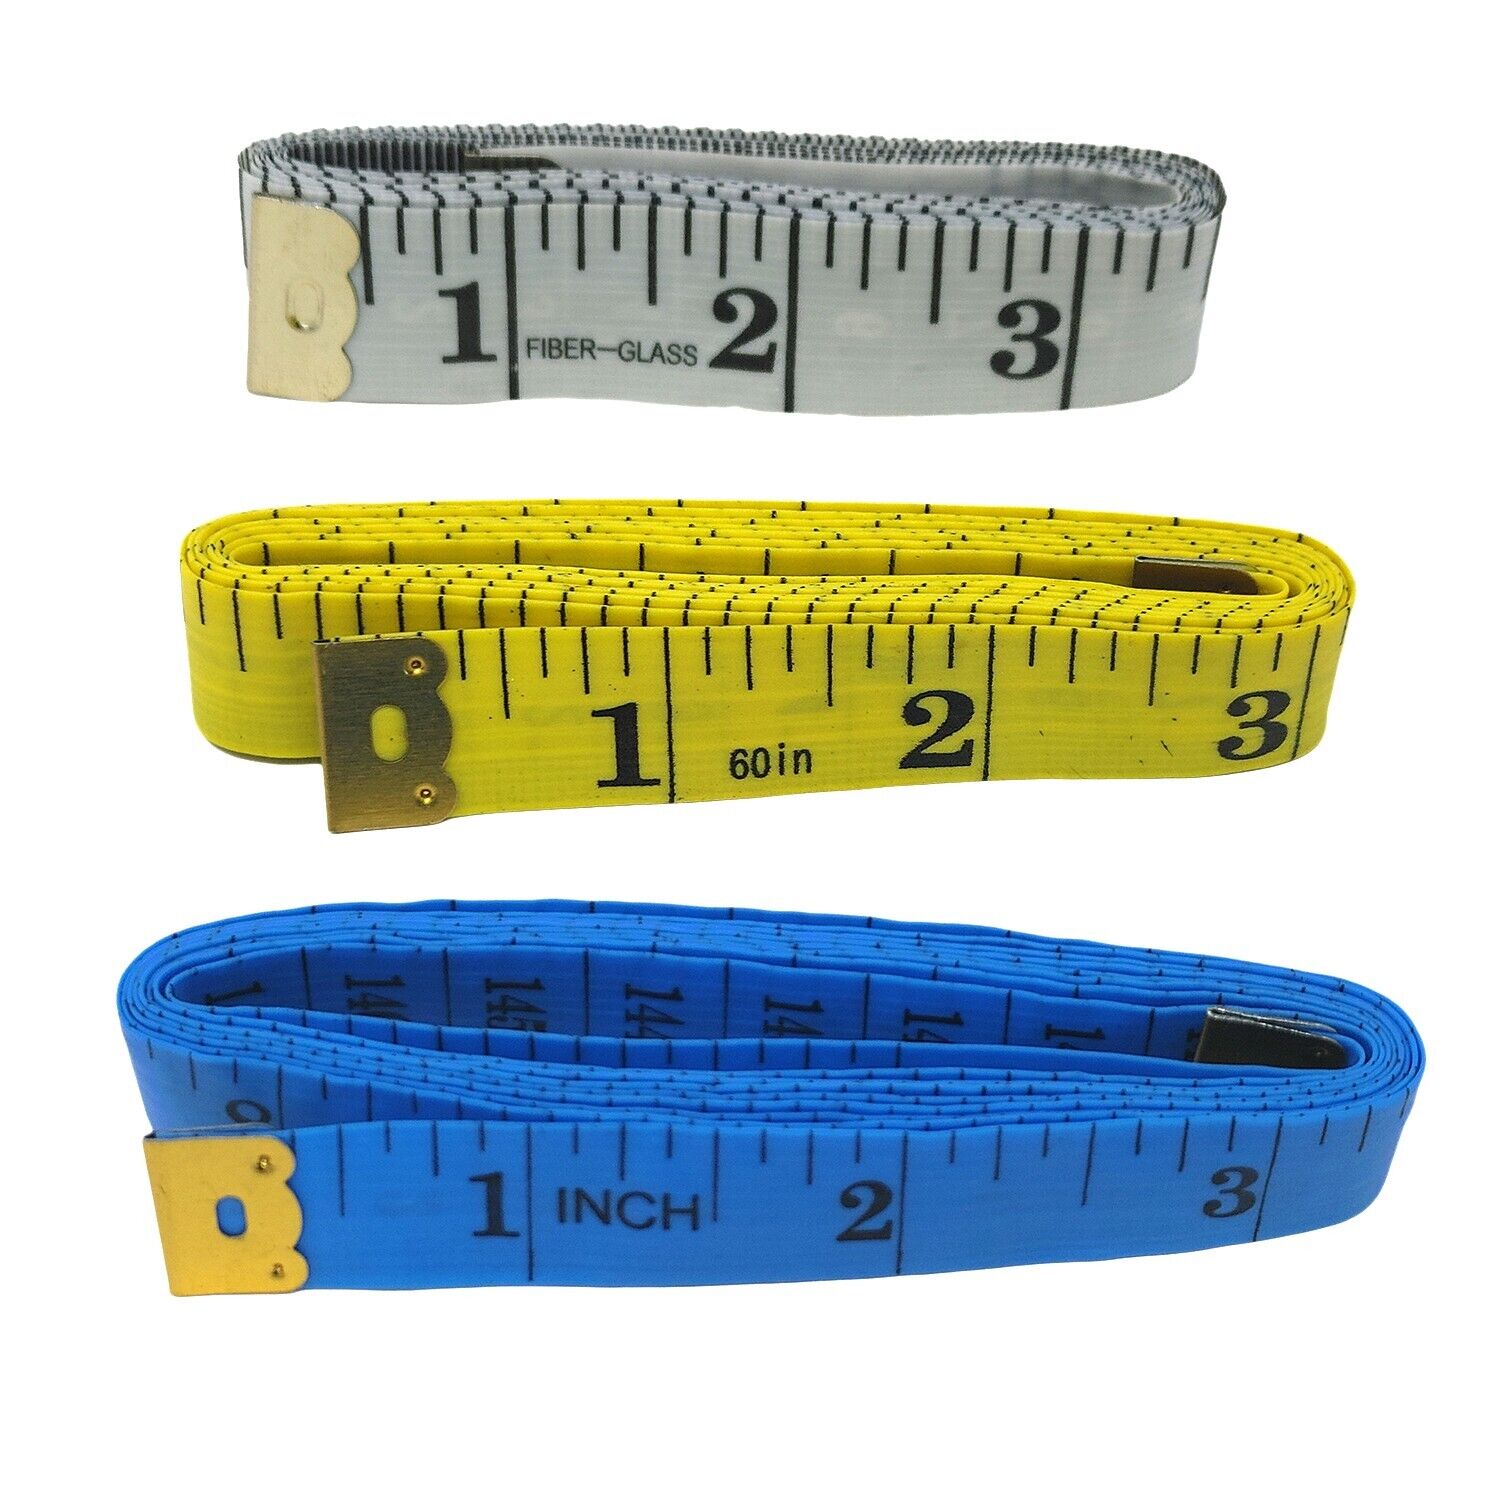 3 Pack Tape Meassure Soft Measuring Body Ruler Sewing Cloth Tailor